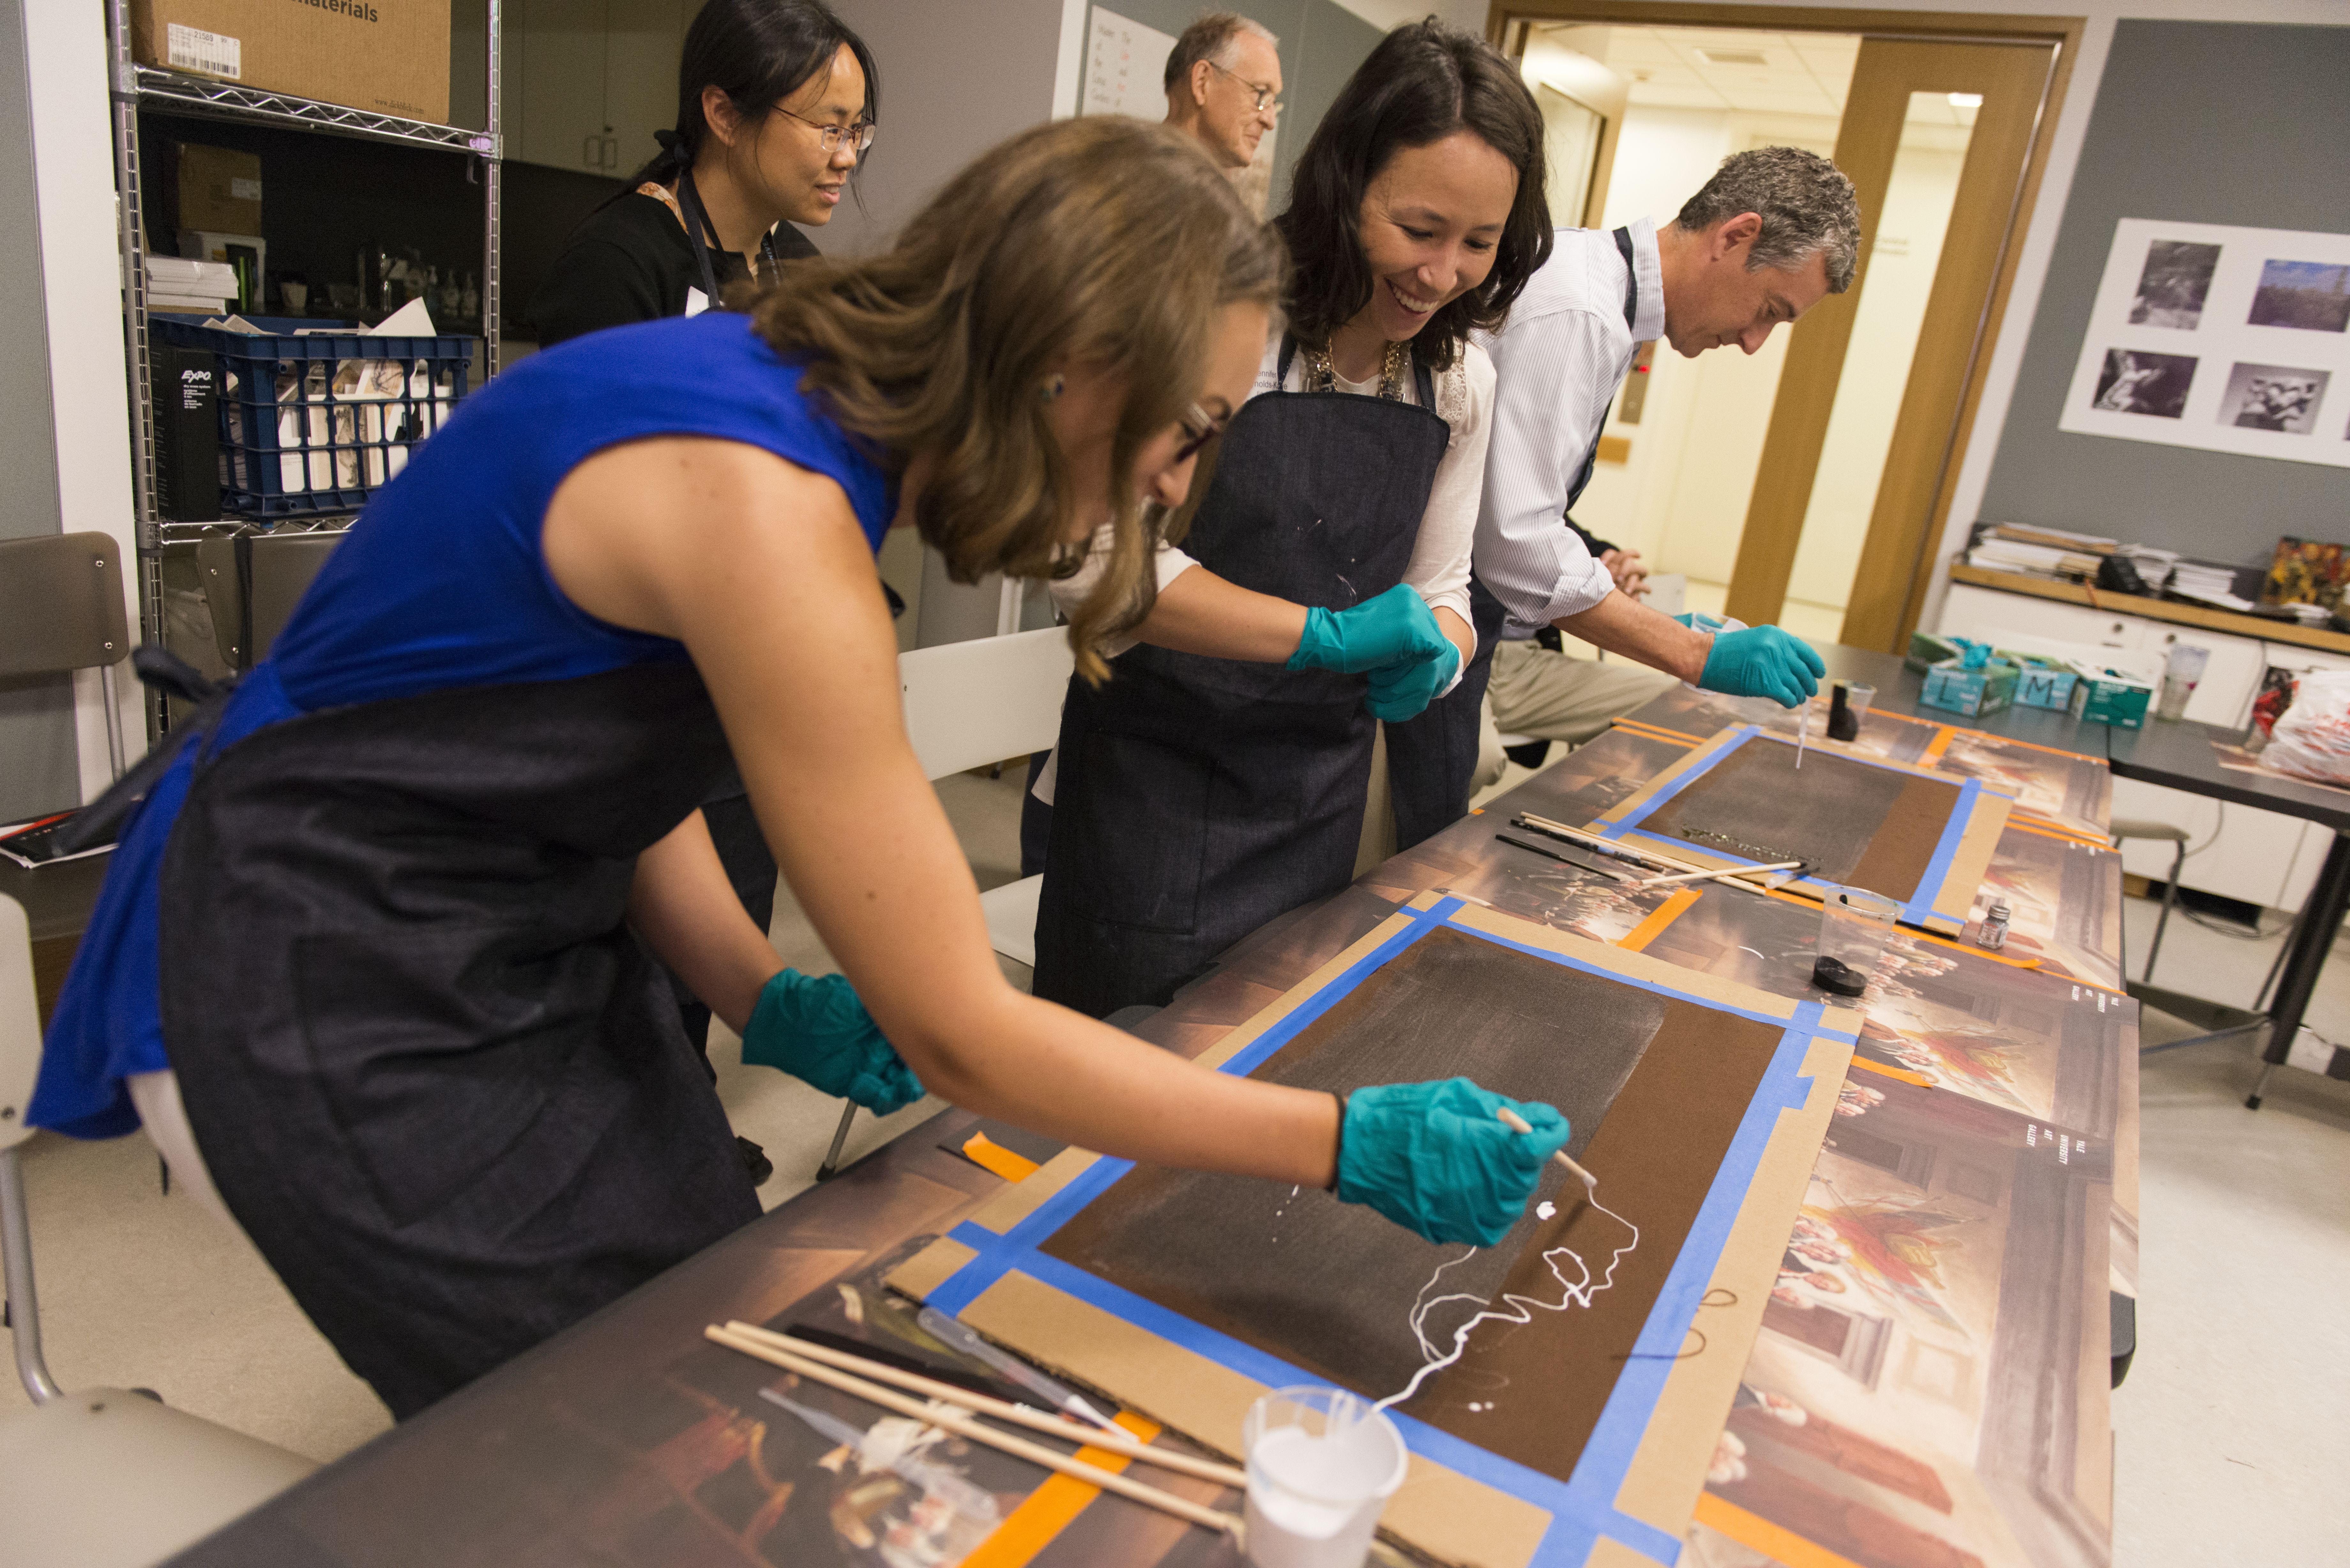 Staff explore Pollock’s materials in a studio session, led by Assistant Curator of Conservation Cindy Schwarz (not pictured.)